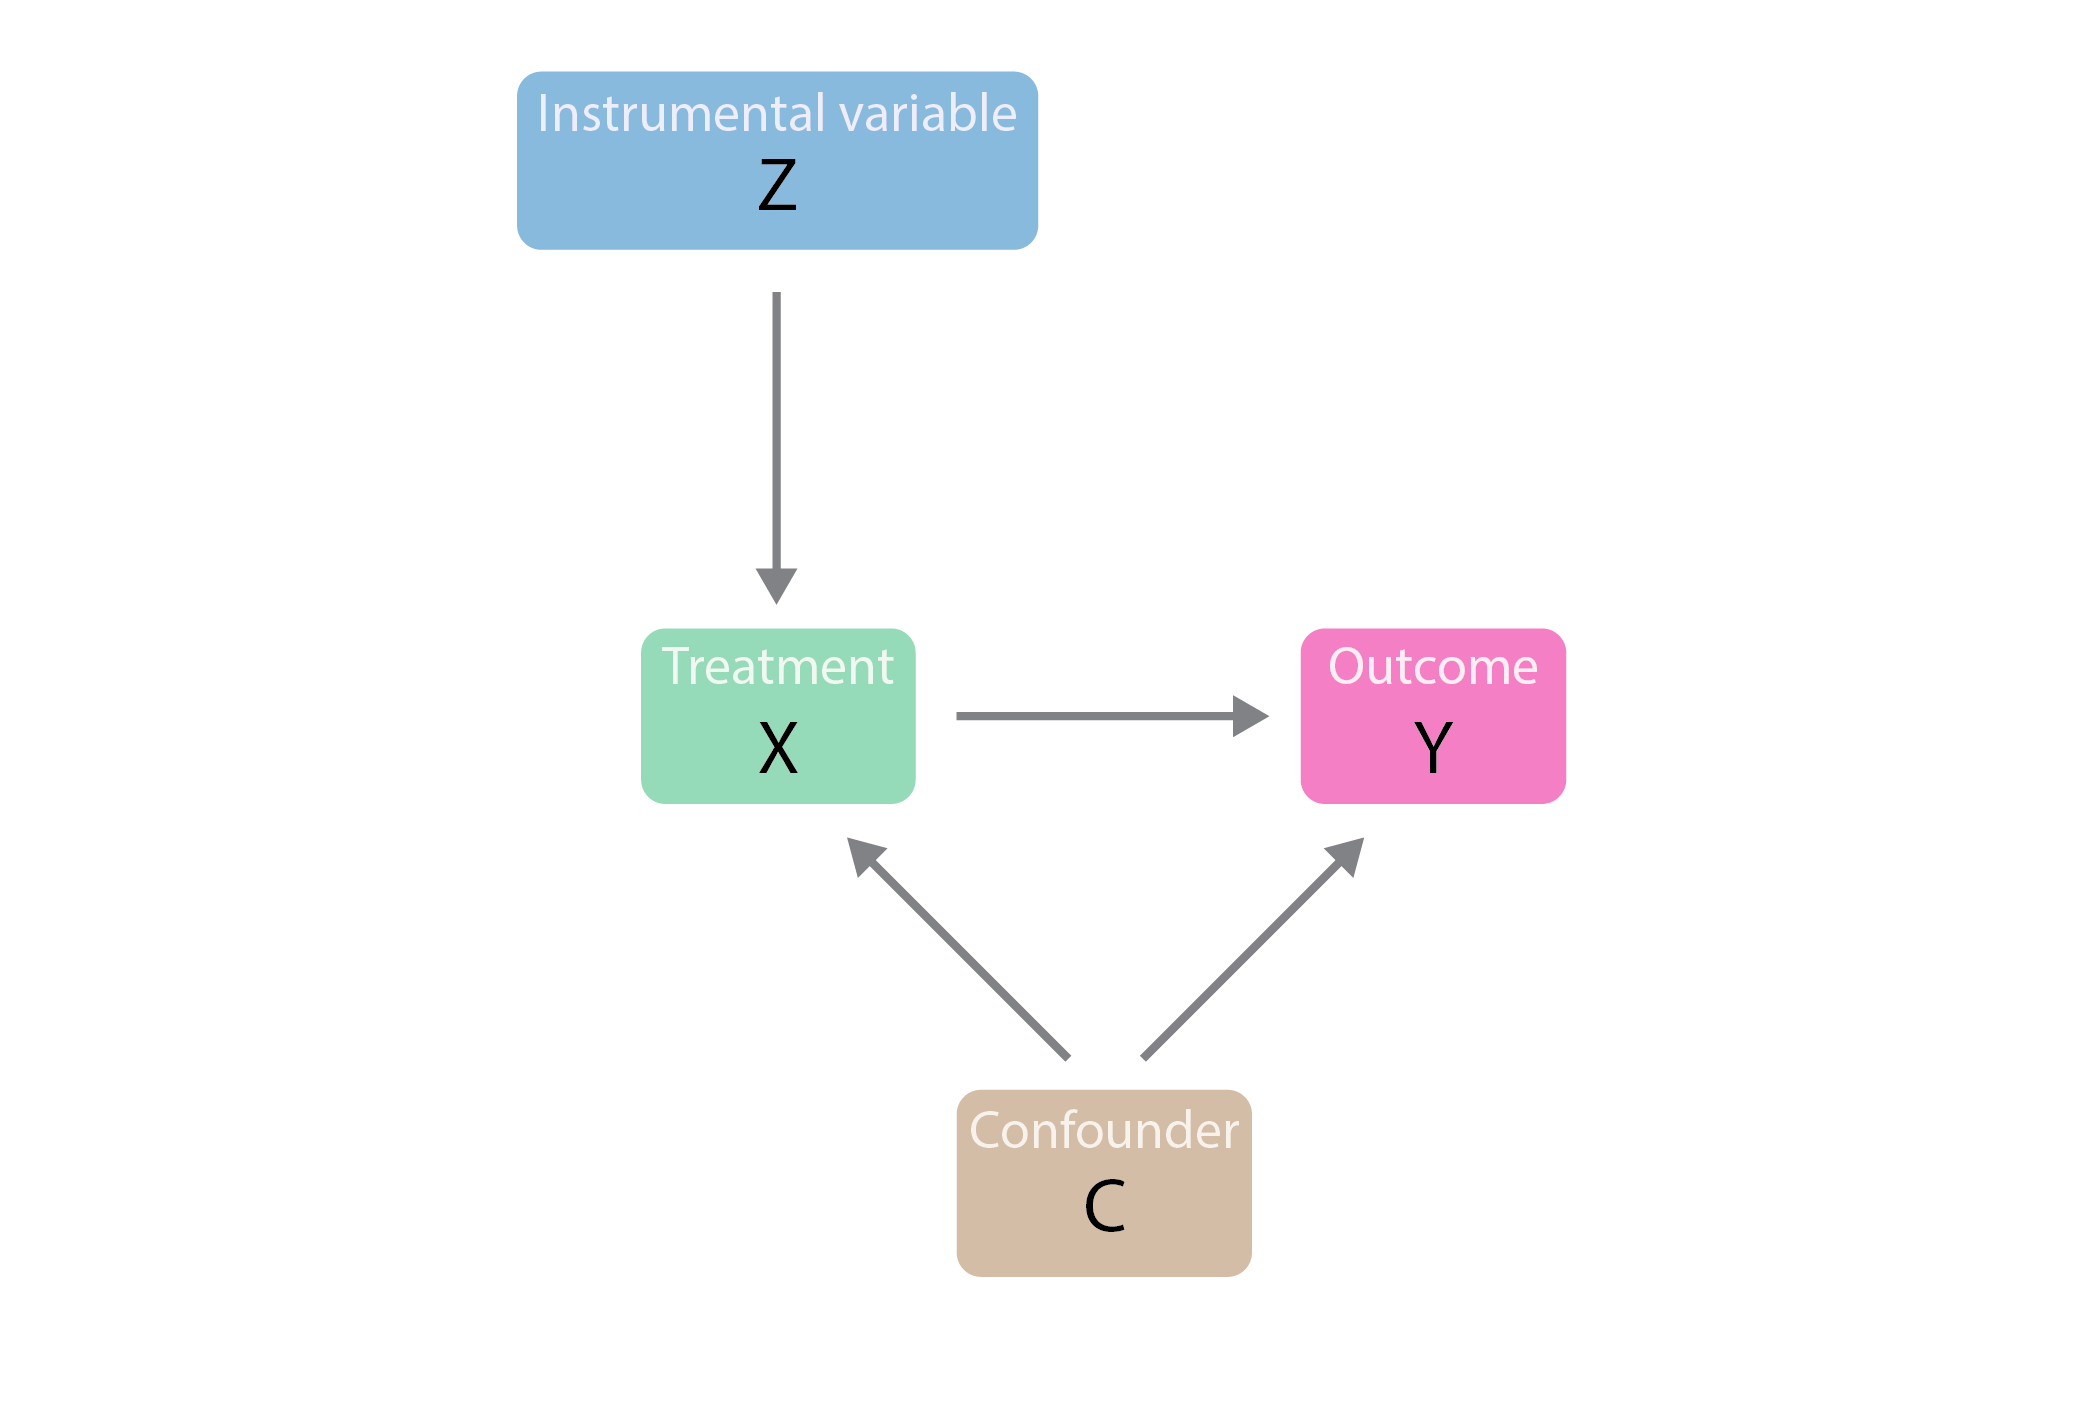 Causal diagram of the instrumental variable approach